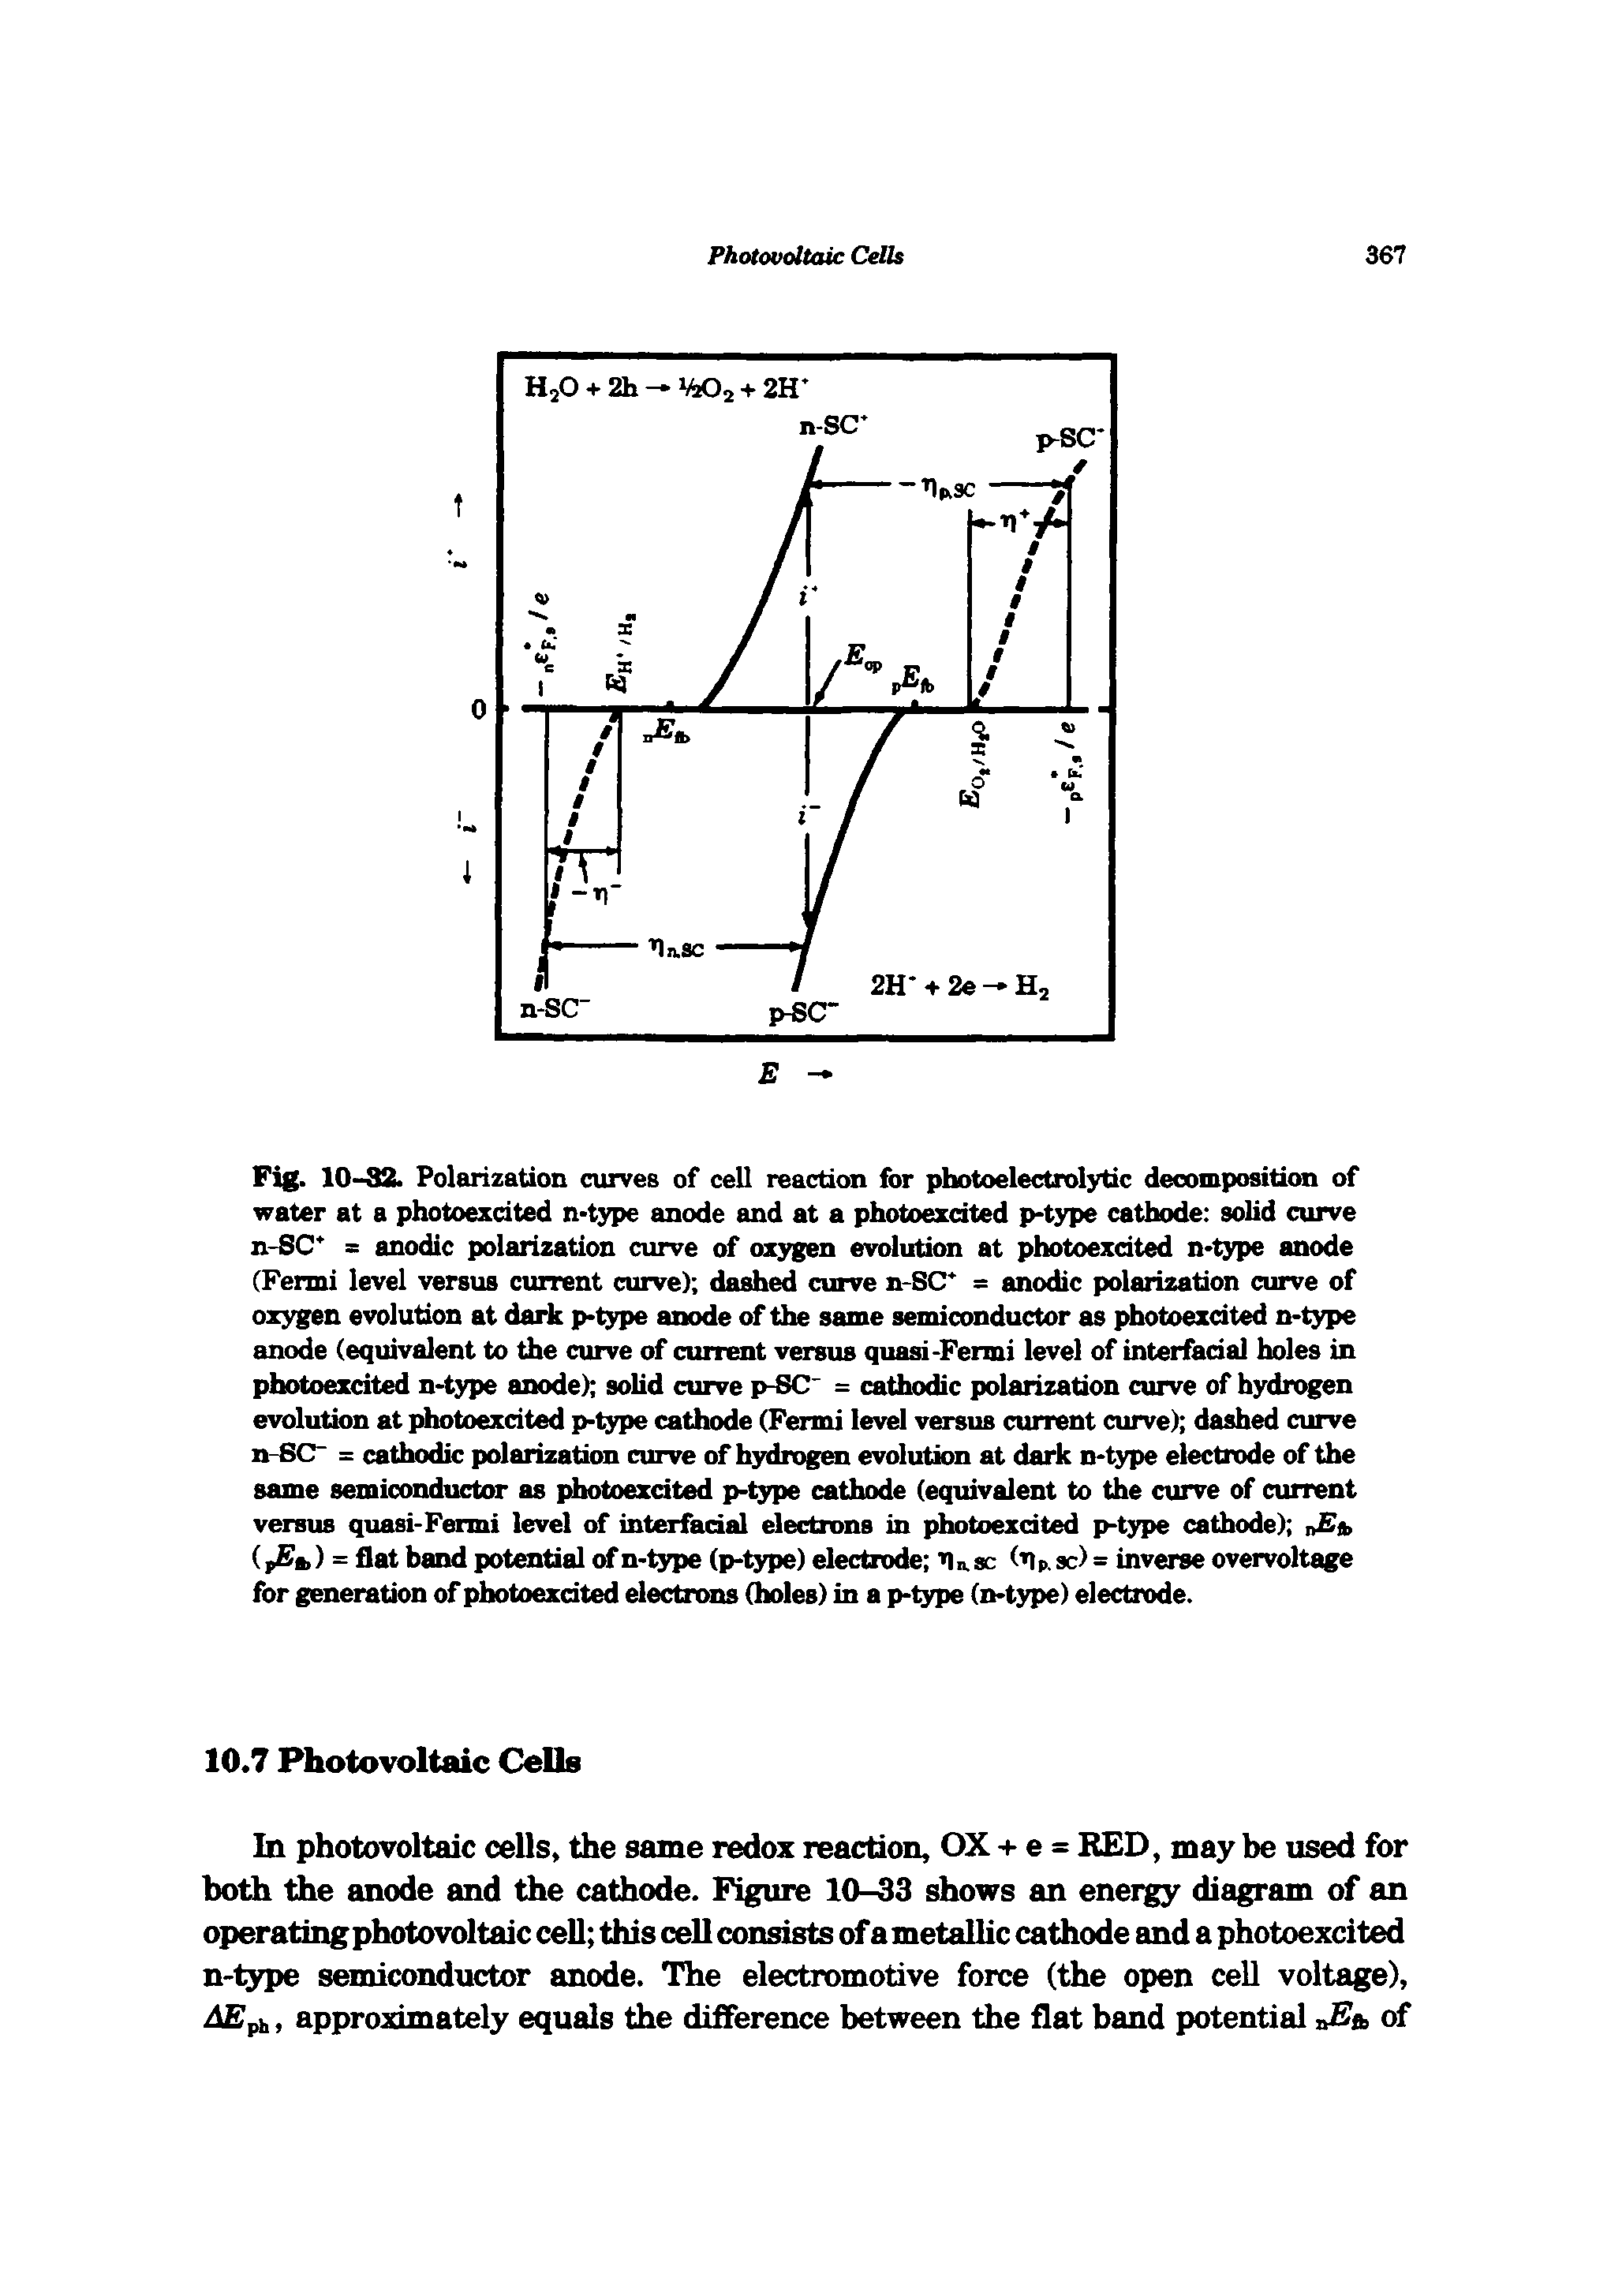 Fig. 10-32. Polarization curves of cell reaction for photoelectrolytic decomposition of water at a photoexdted n-type anode and at a photoezdted p-type cathode solid curve n-SC s anodic polarization curve of oxygen evolution at photoexdted n Qpe anode (Fermi level versus current curve) dashed curve n-SC = anodic polarization curve of oxygen evolution at dark p>type anode of the same semiconductor as photoexdted n-type anode (equivalent to the curve of current versus quasi-Fermi level of interfadal holes in photoezdted n-type anode) solid curve p-SC = cathodic polarization curve of hydrogen evolution at photoexdted p-type cathode (Fermi level versus current curve) dashed curve n-8Cr = cathodic polarization curve of hydrogen evolution at dark n-type electrode of the same semiconductor as photoezdted p-type cathode (equivalent to the curve of current versus quasi-Fermi level of interfadal electrons in photoexdted p-type cathode) > > = flat band potential of n-type (p-type) electrode nn.sc (v p sc) = inverse overvoltage for generation of photoexdted electrons (holes) in a p-type (n-type) electrode.